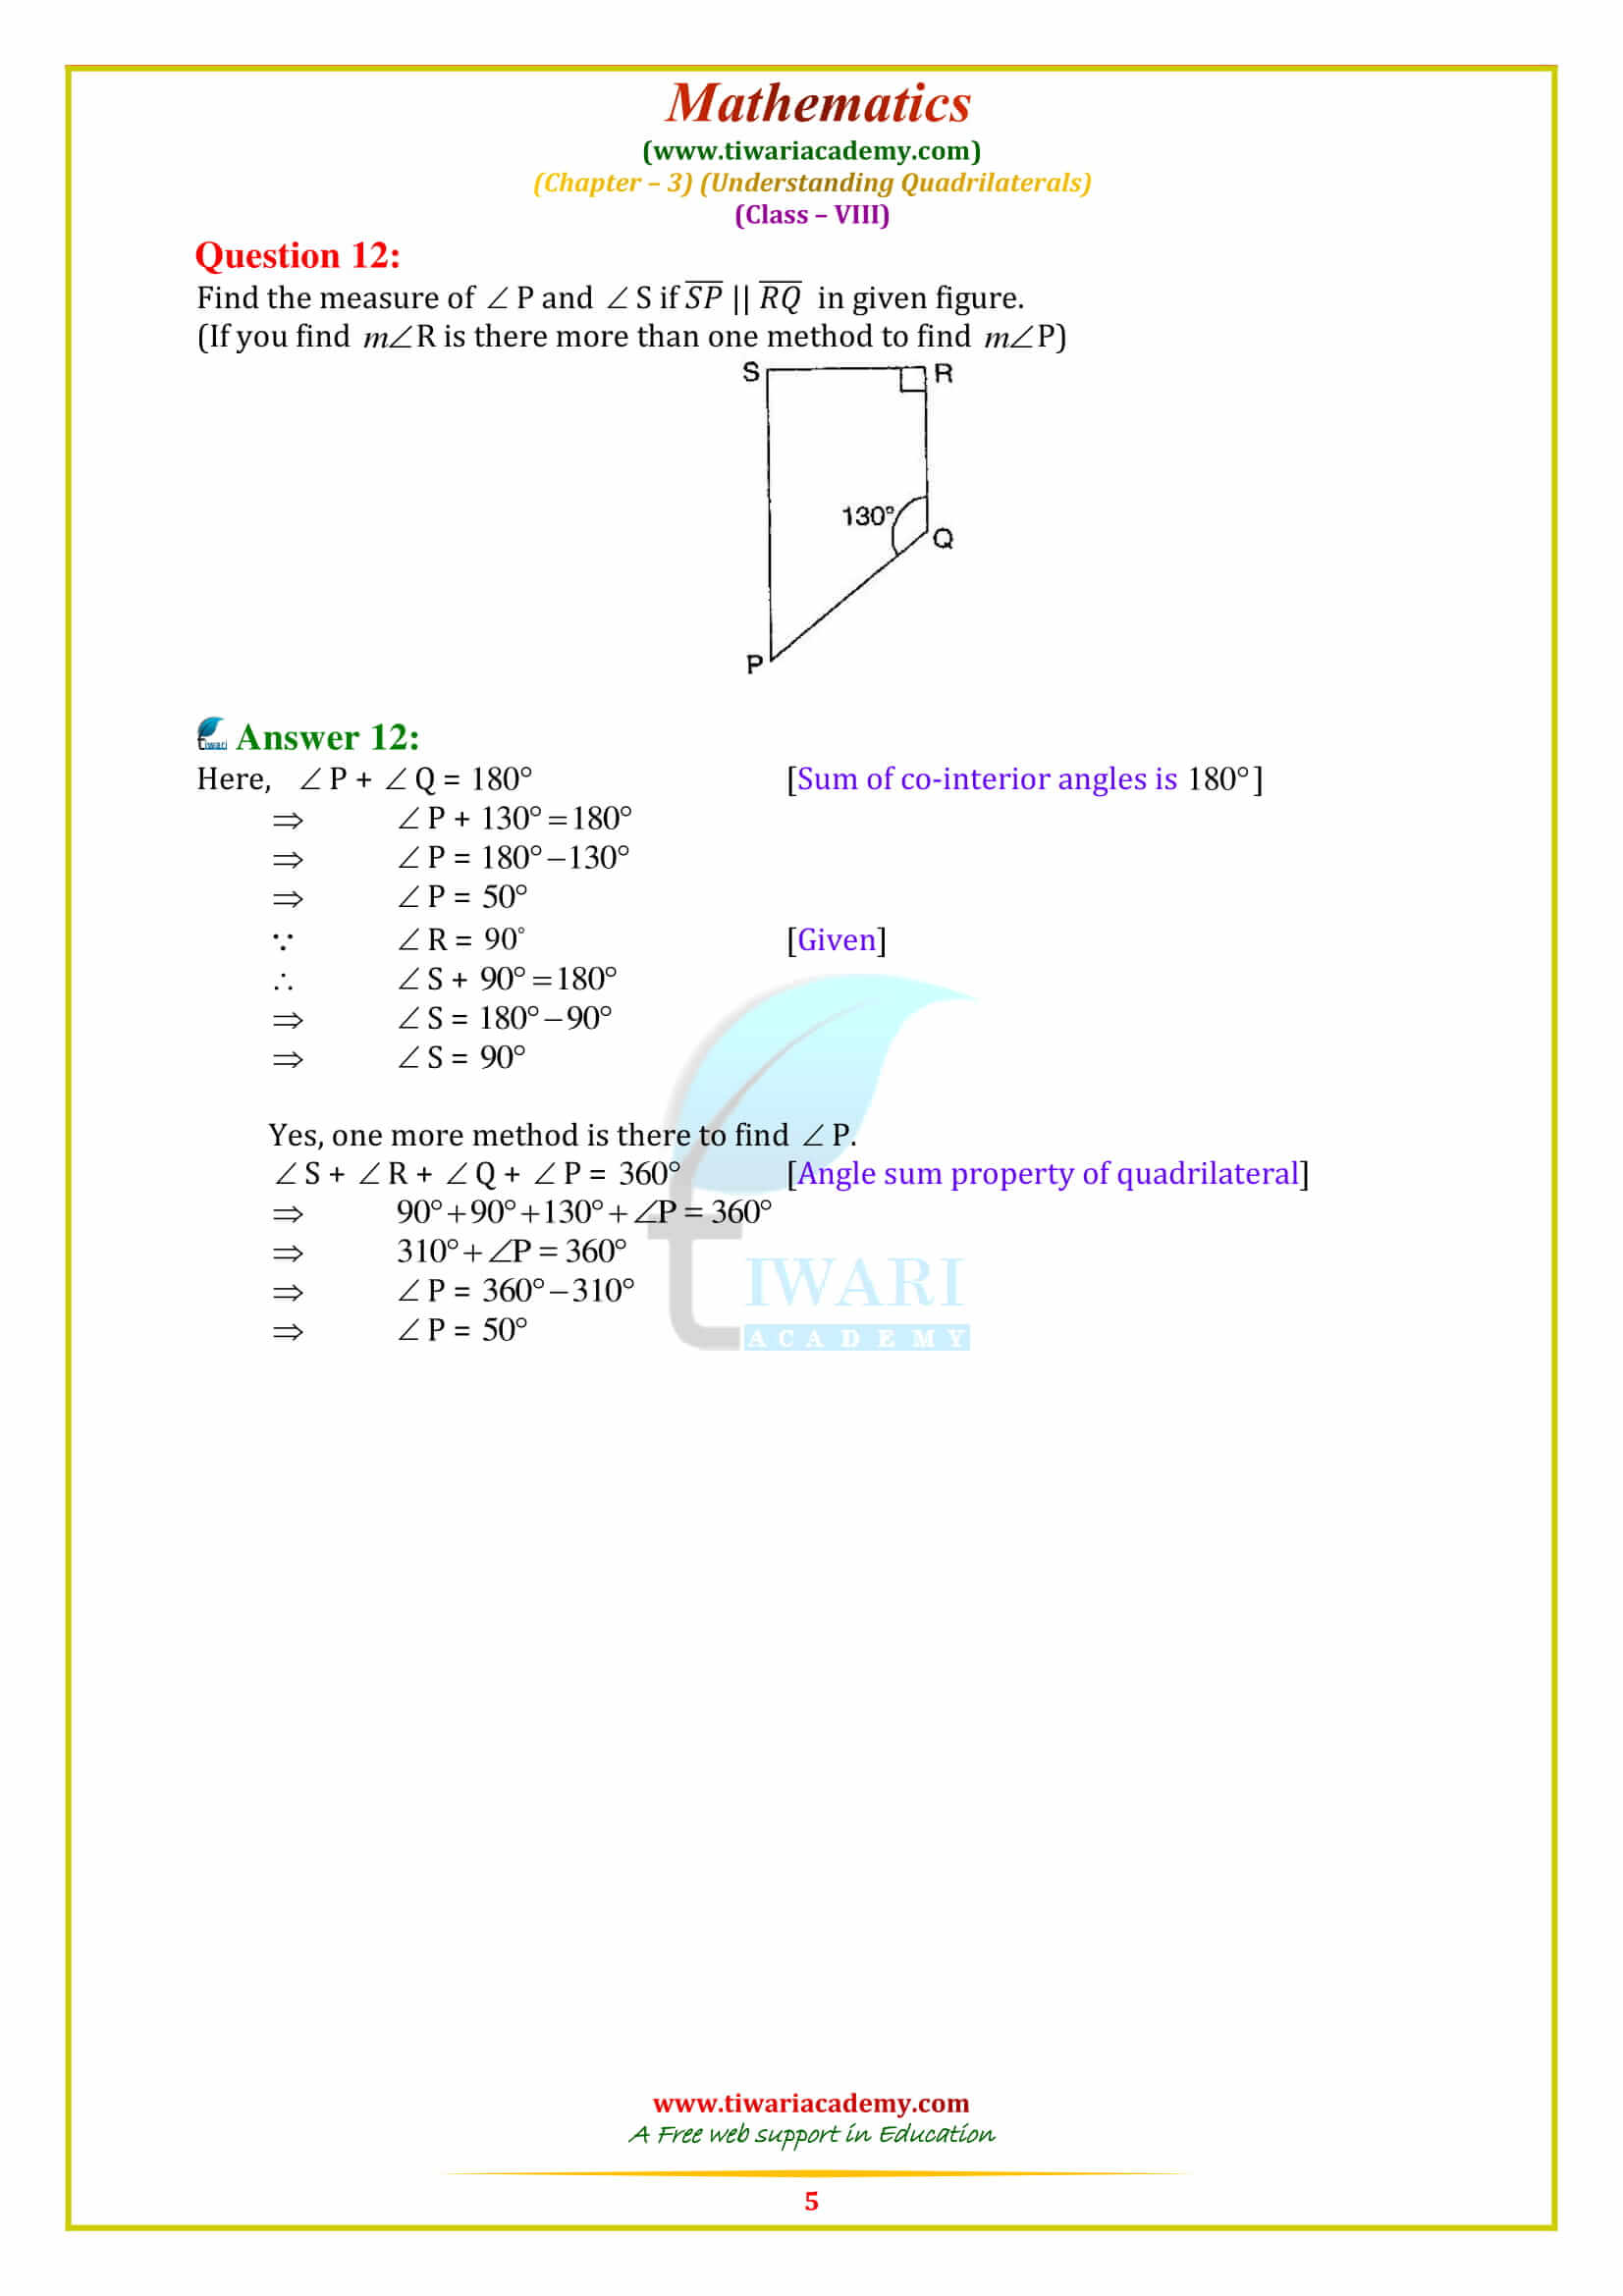 NCERT Solutions for Class 8 Maths Chapter 3 Exercise 3.3 for mp, cbse board